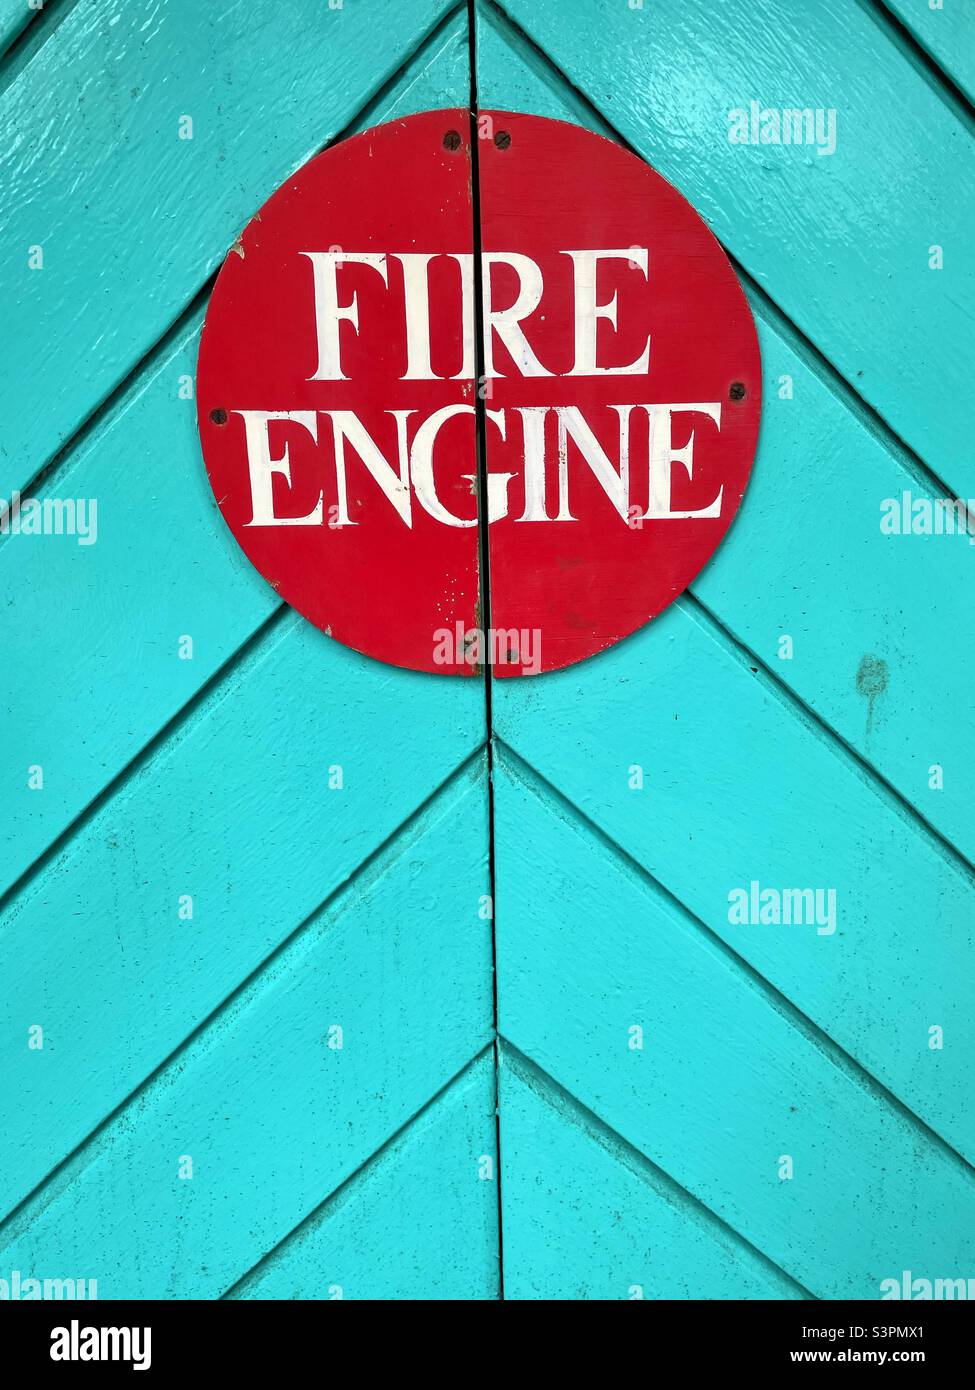 Fire Engine sign On a painted turquoise wooden door at Portmeirion, Gwynedd, North Wales. Stock Photo